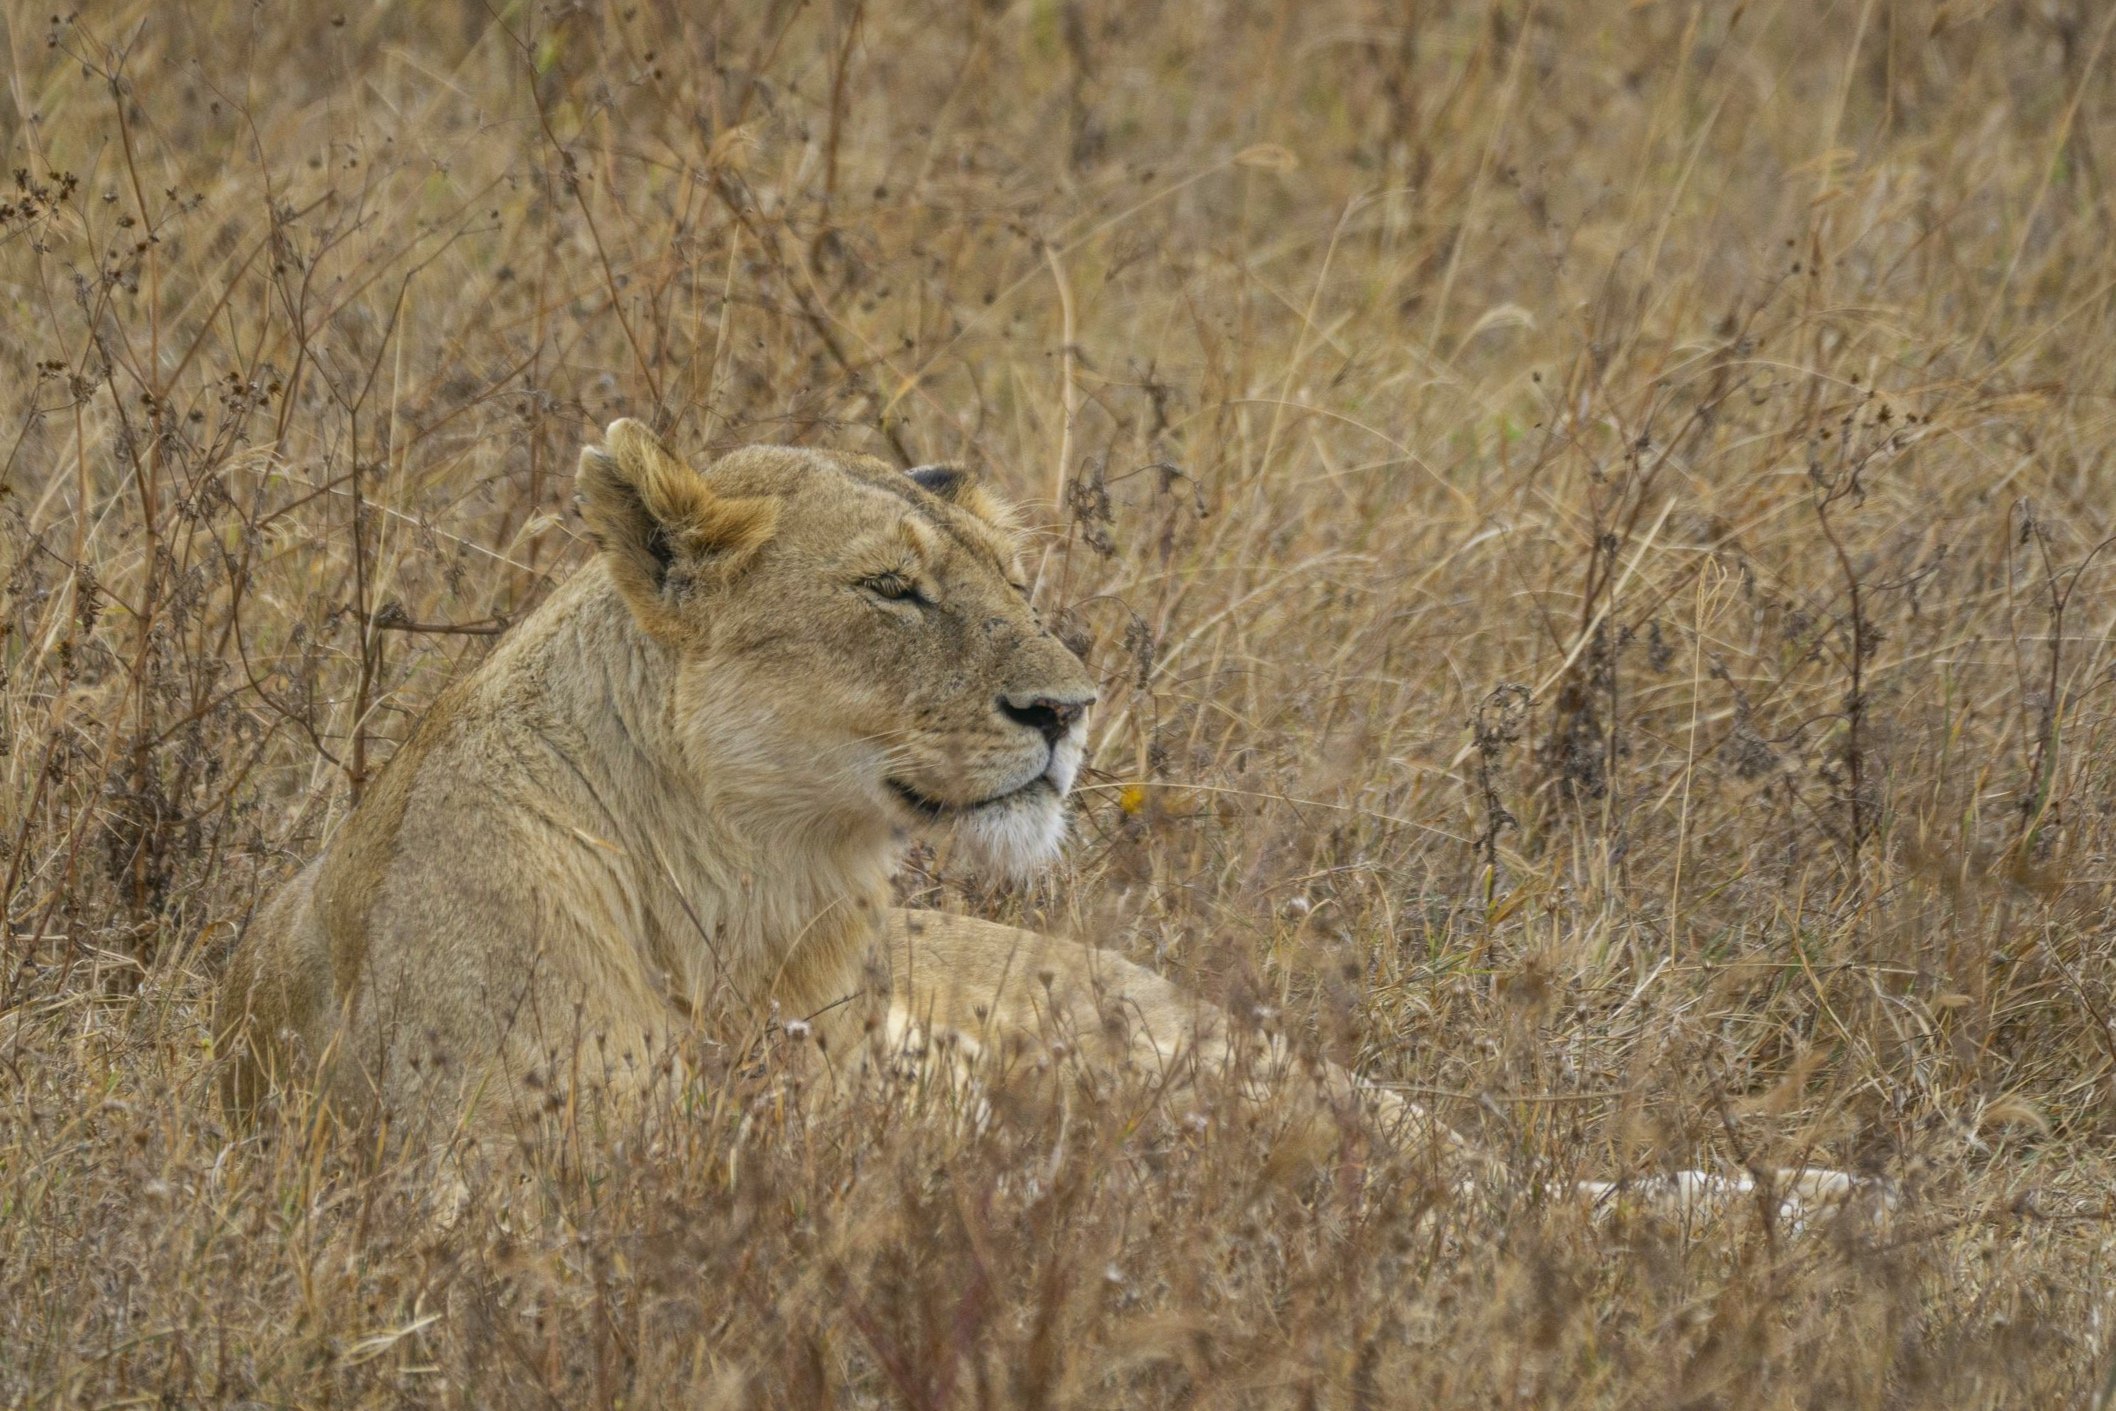 Lioness resting in Grass